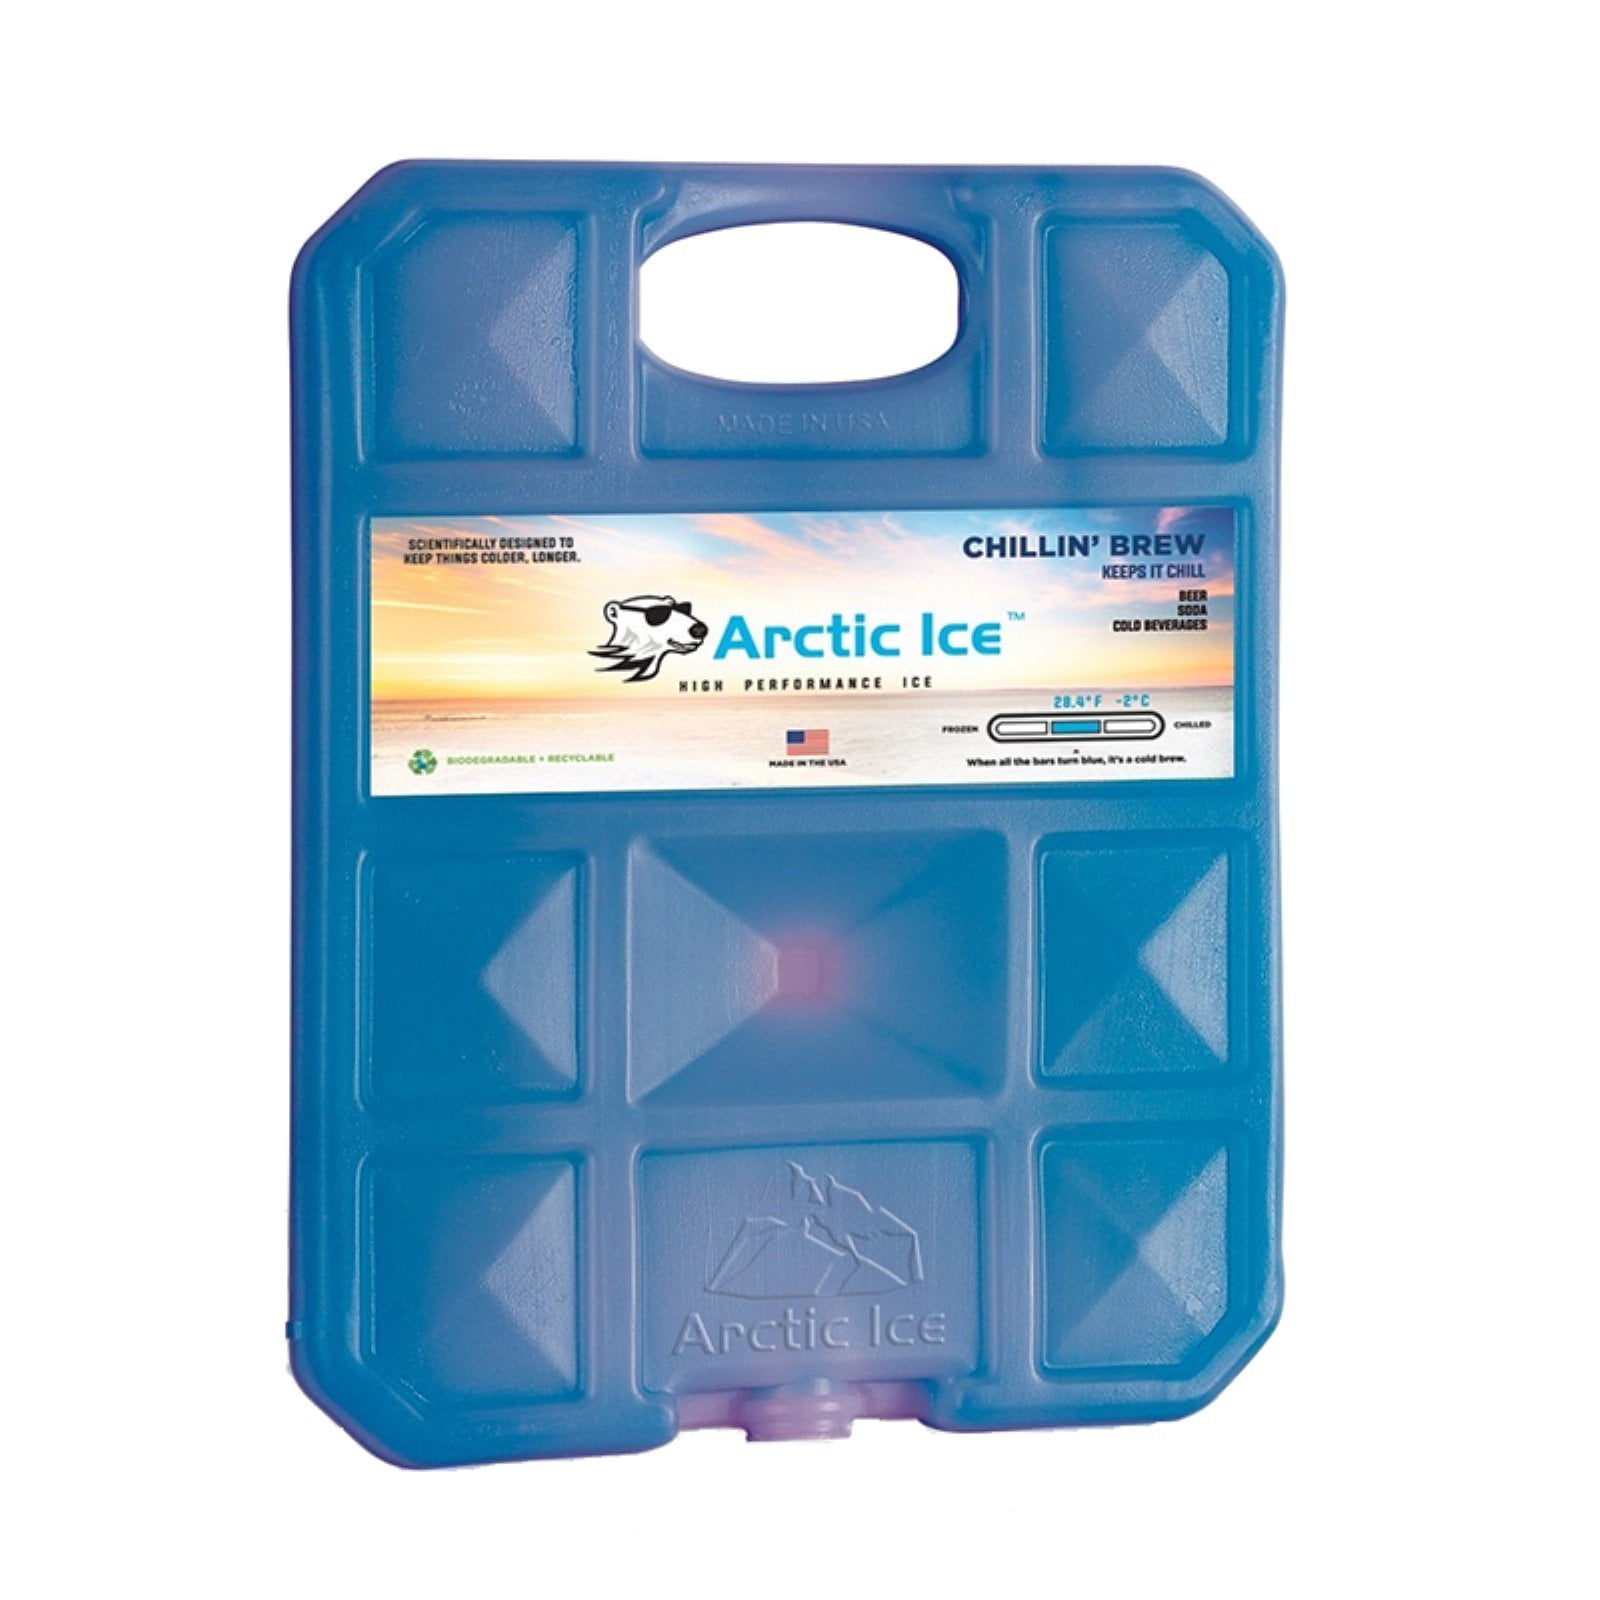 Arctic Ice Chillin Brew Series 2.5 LB Container 1210 for sale online 